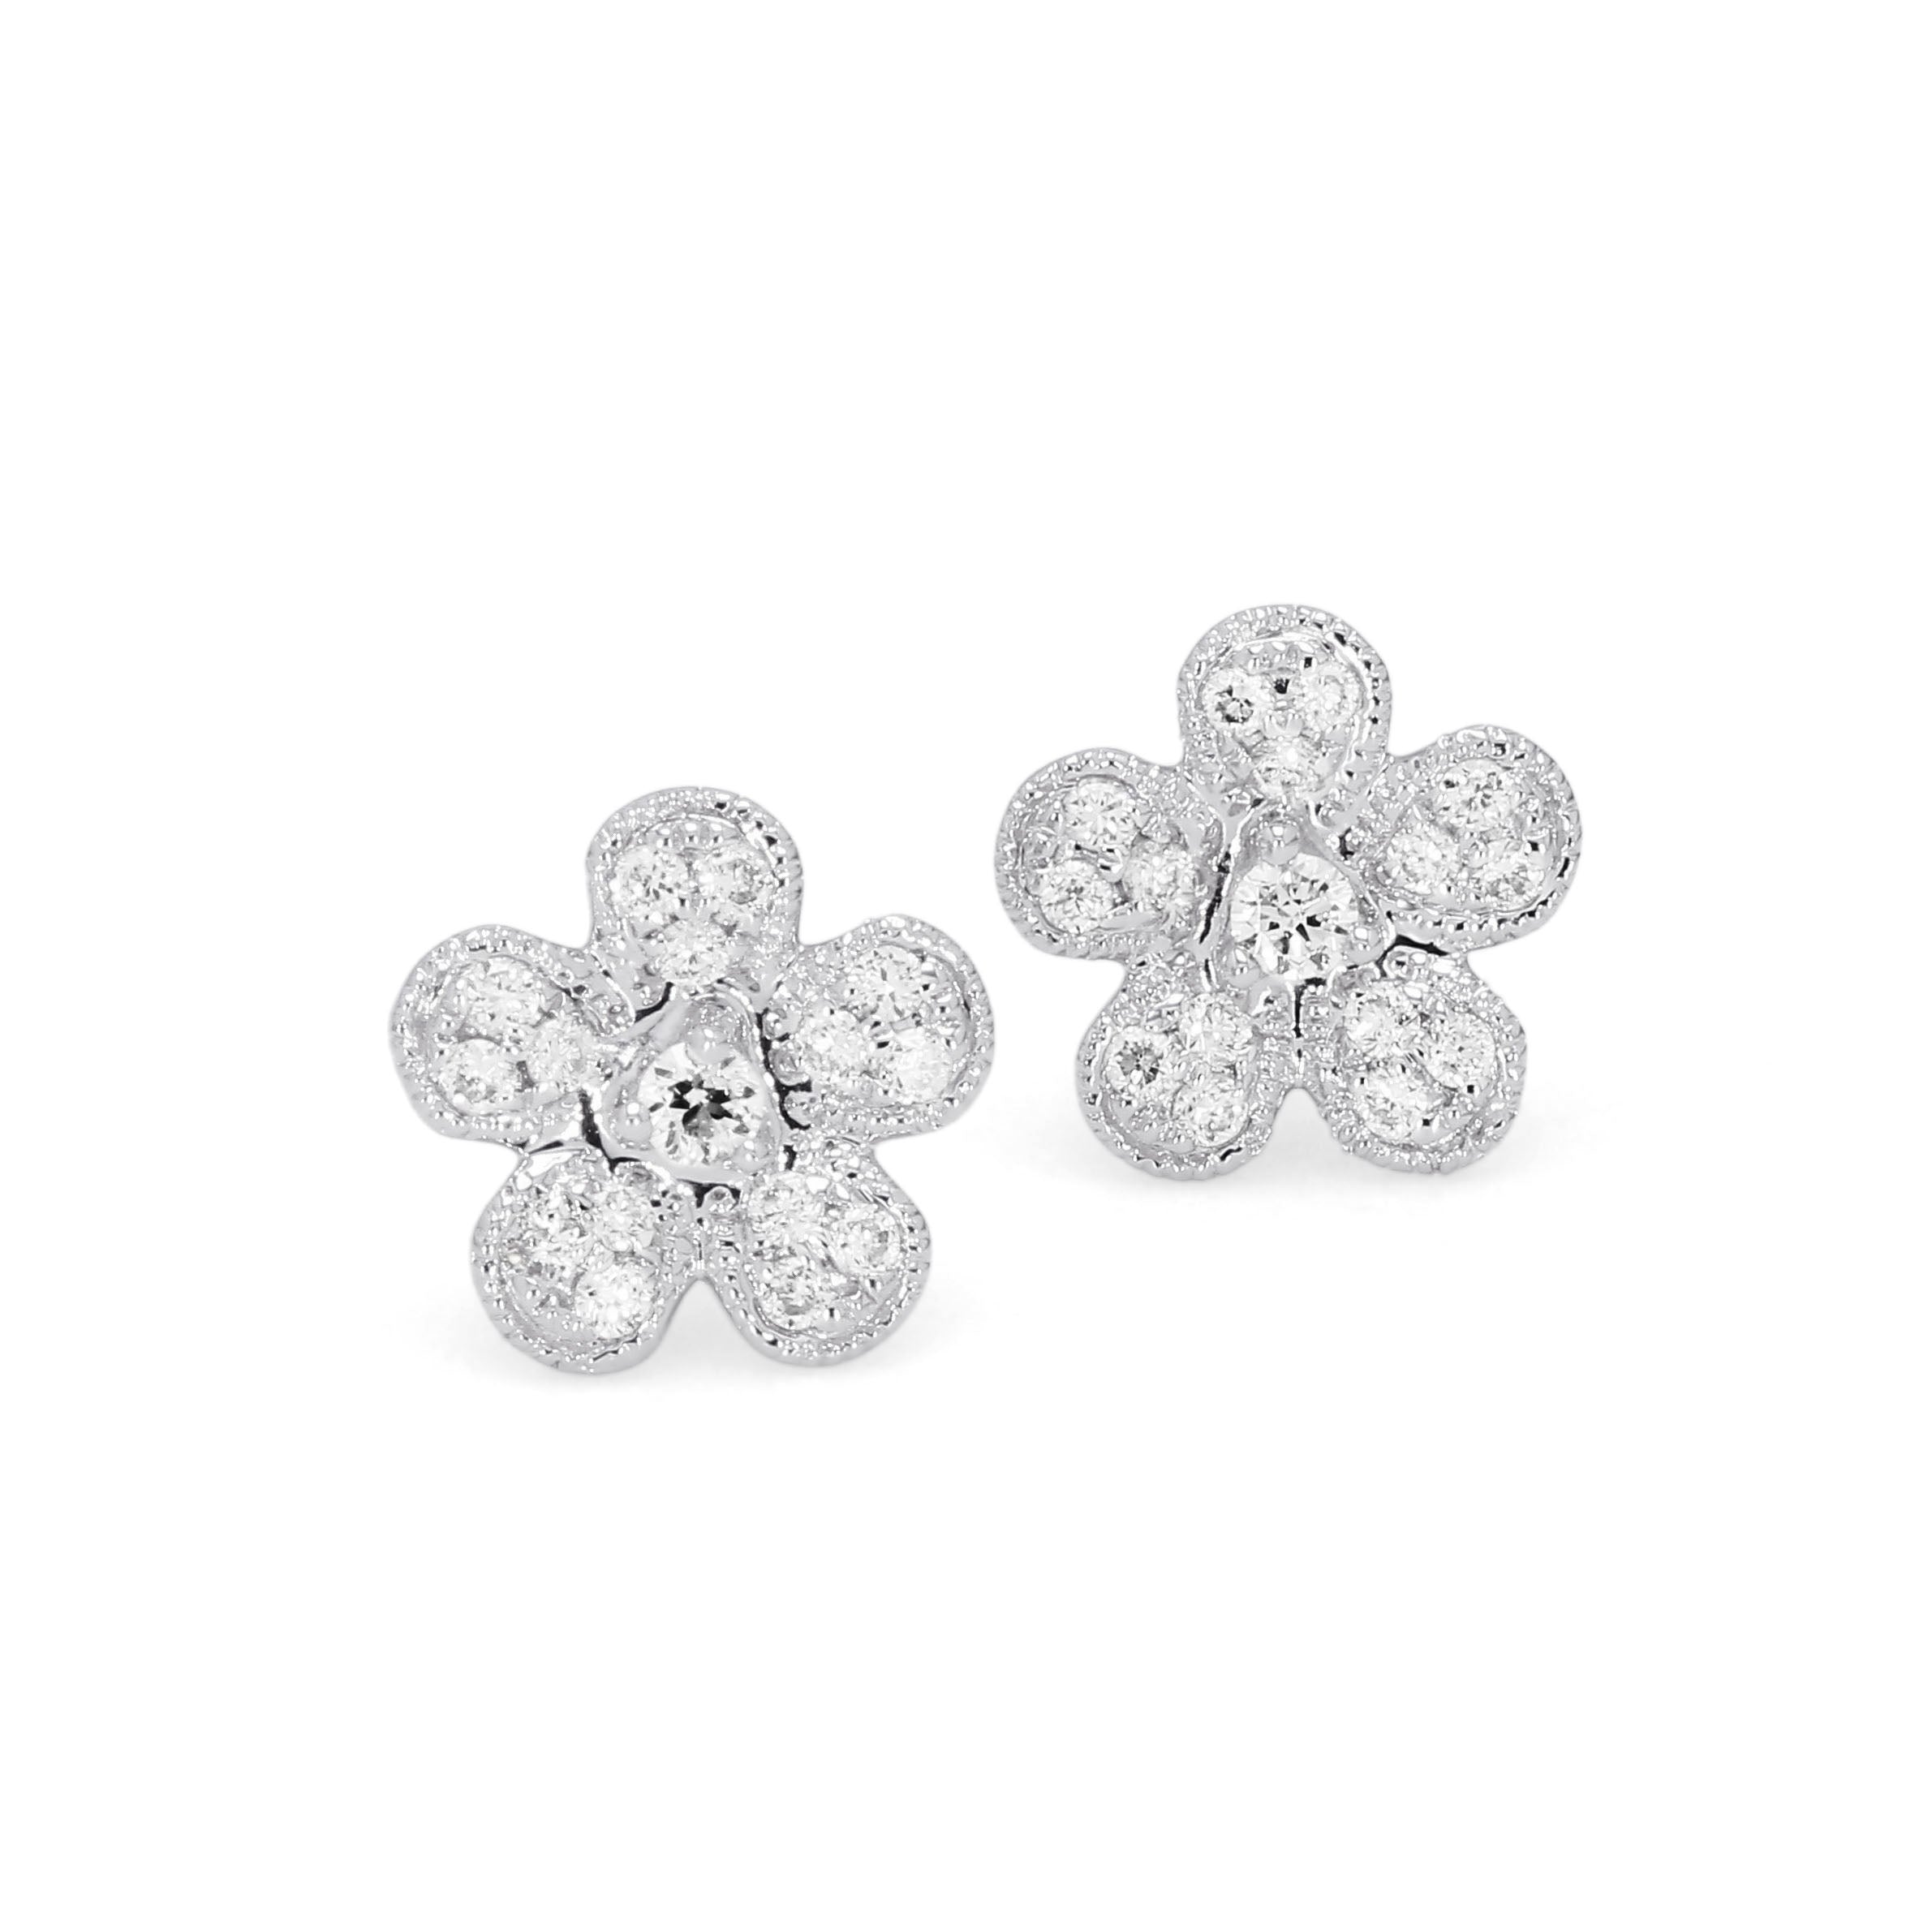 Adamar Jewels Cherry Blossom Earstuds in 18K white gold set with diamonds